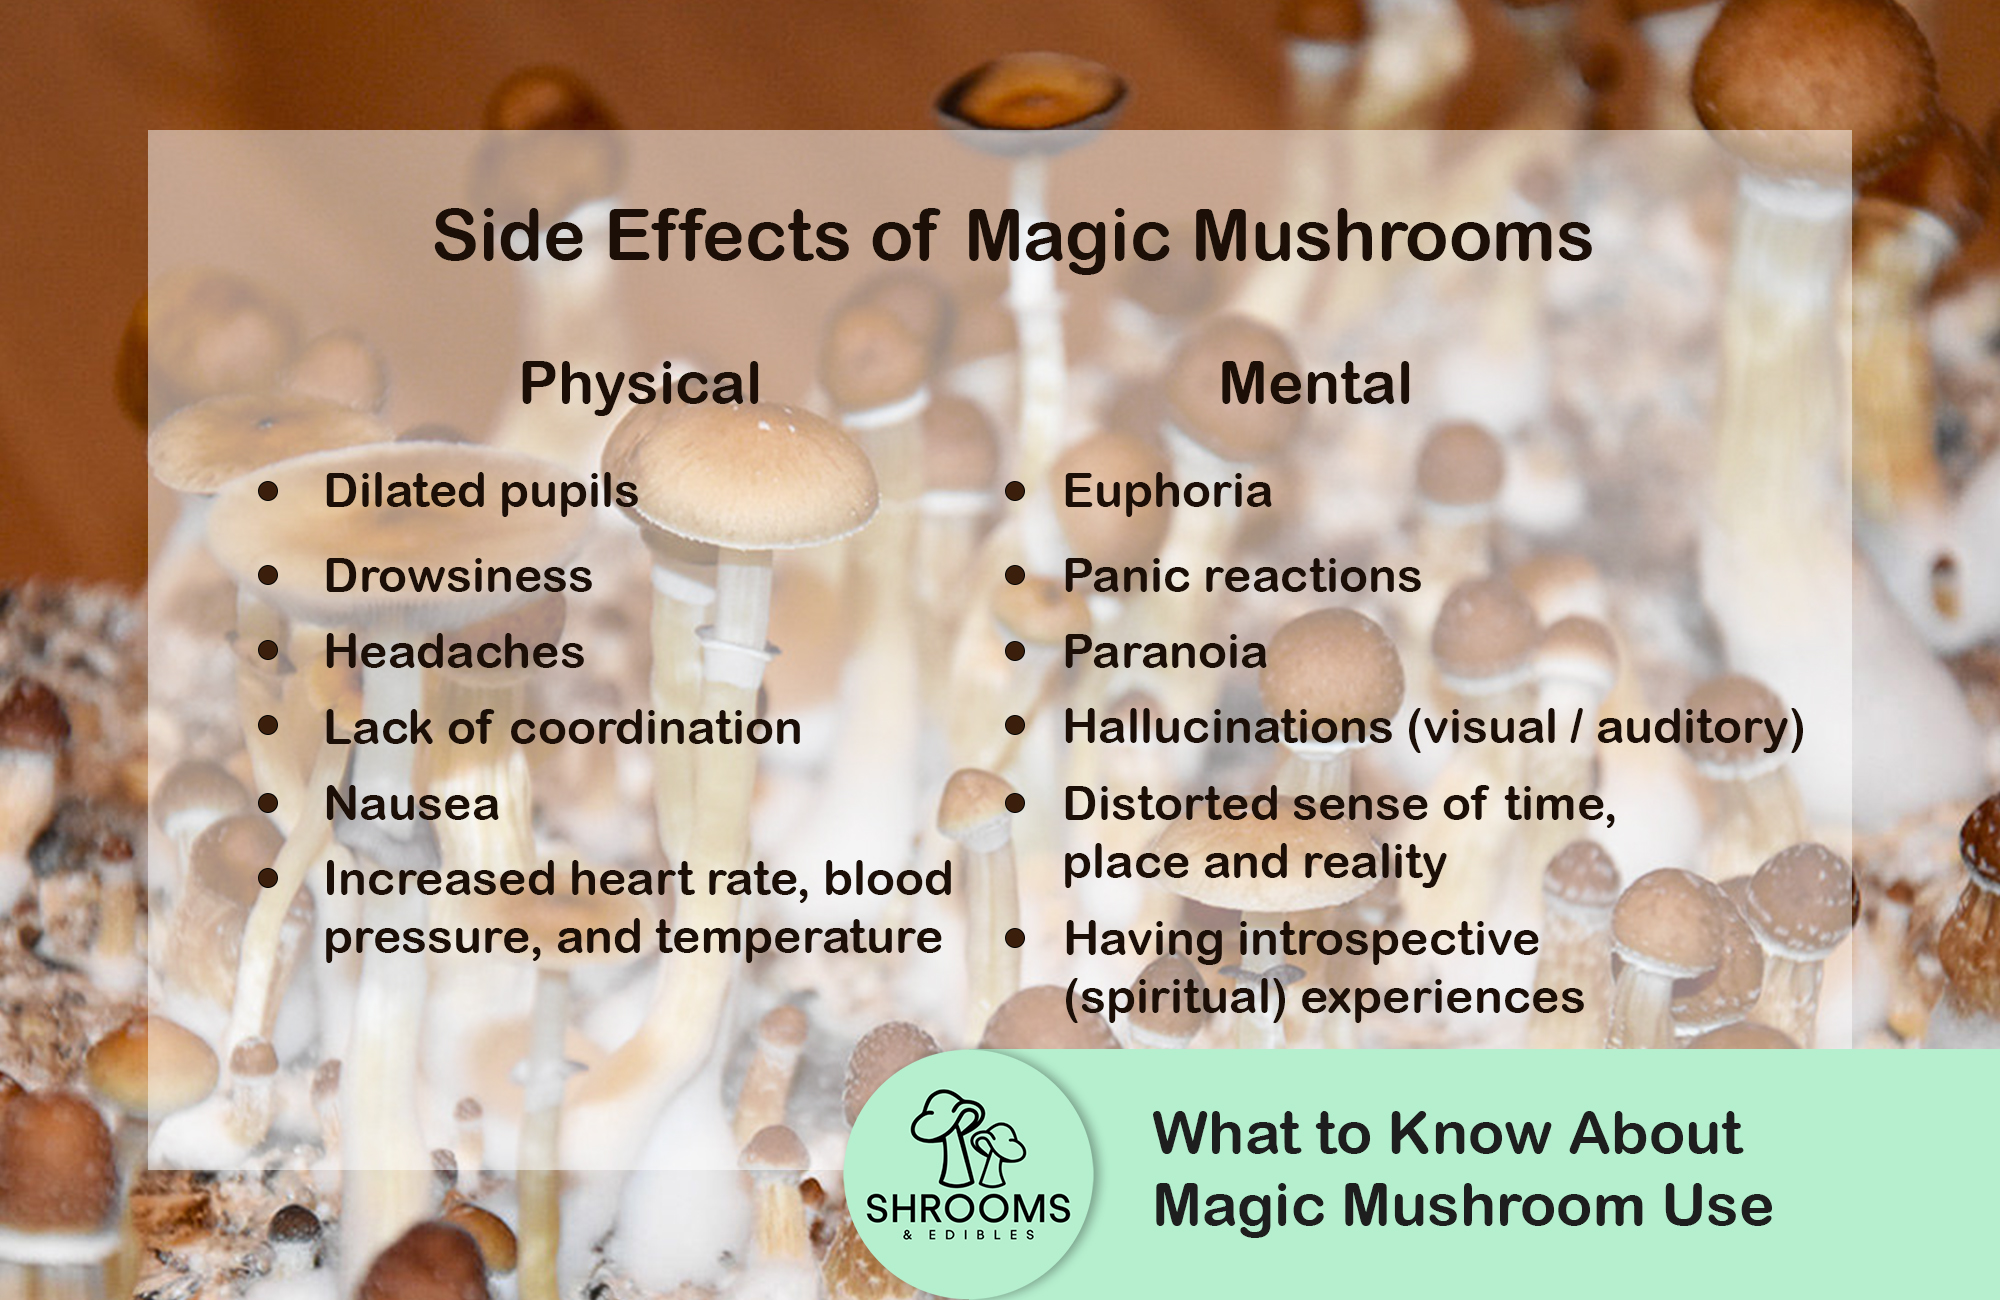 What To Know About Magic Mushroom Use